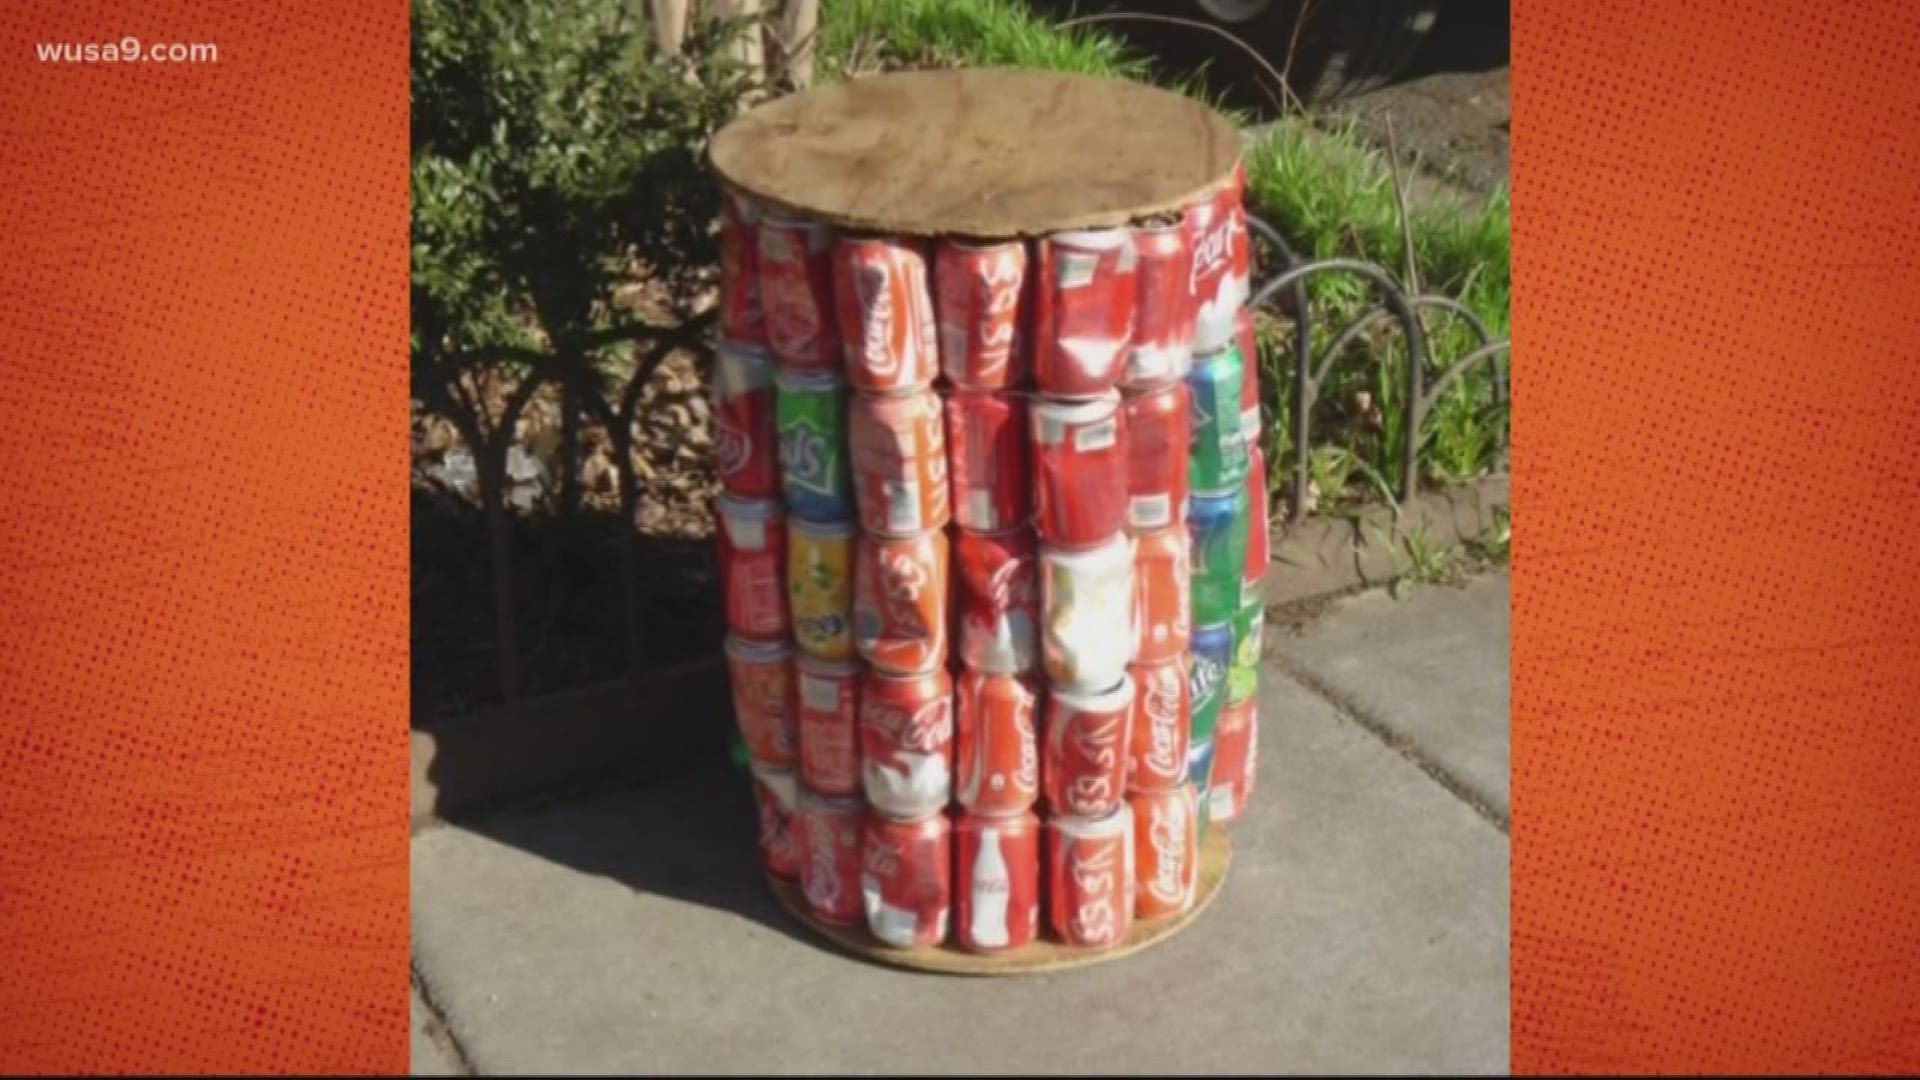 A makeshift end table made from soft drink cans and electrical wire? Well, one man's trash is another man's IKEA living room set ... right?